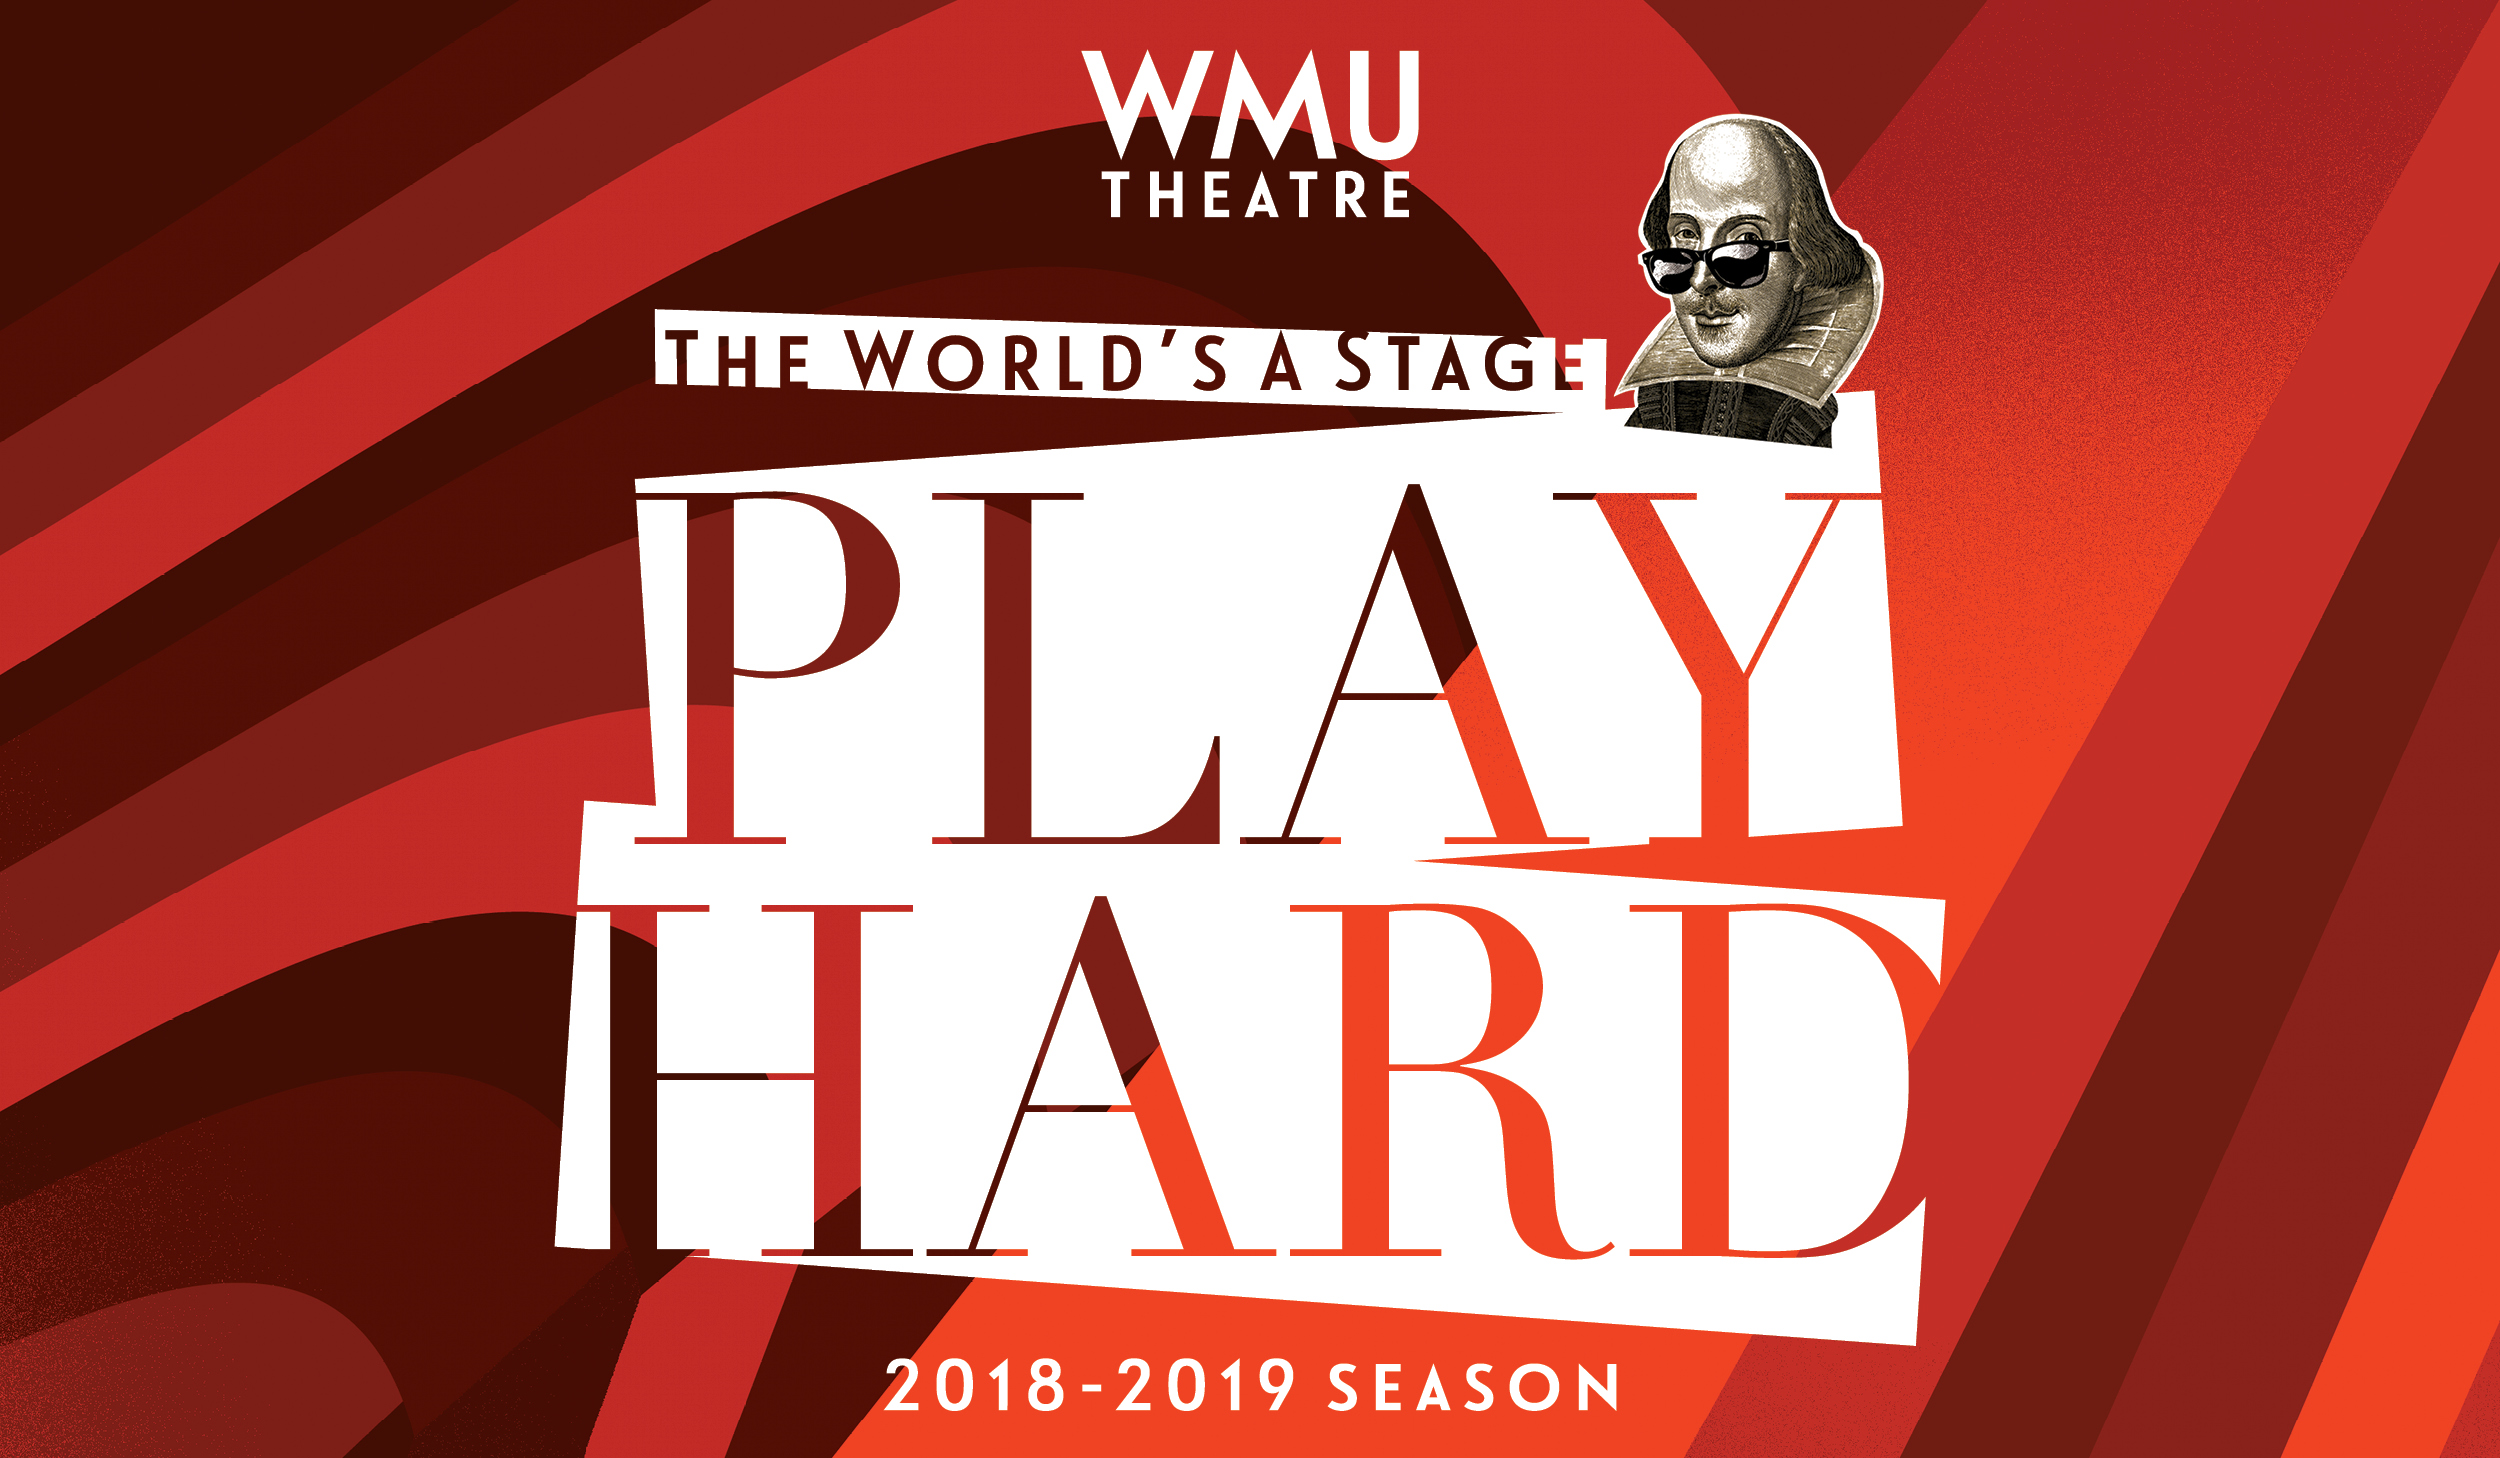 WMU Theatre, The World's A Stage, 2018-2019 Season, image of Shakespeare wearing sunglasses